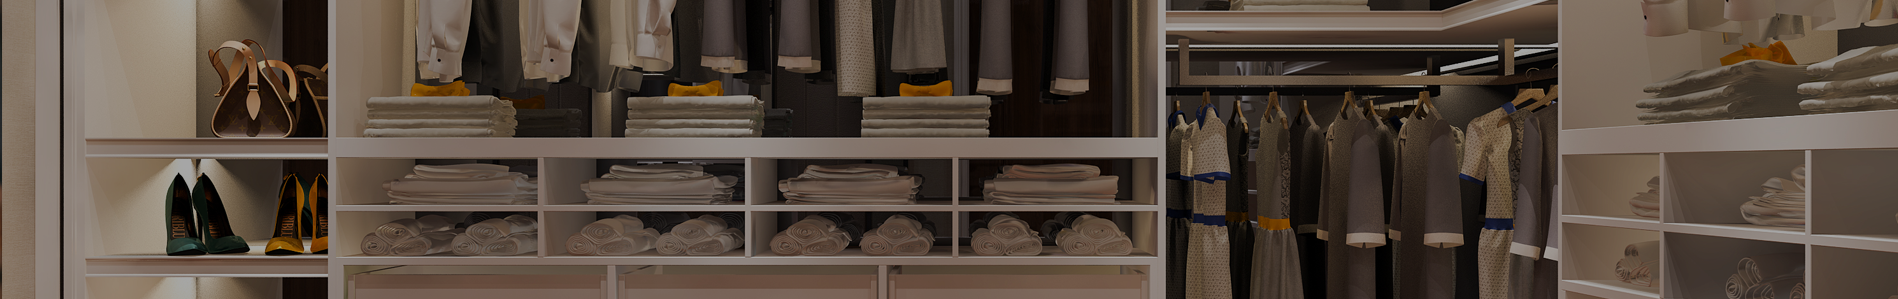 Organizing a closet: 10 incredible tips to make your daily routine easier!